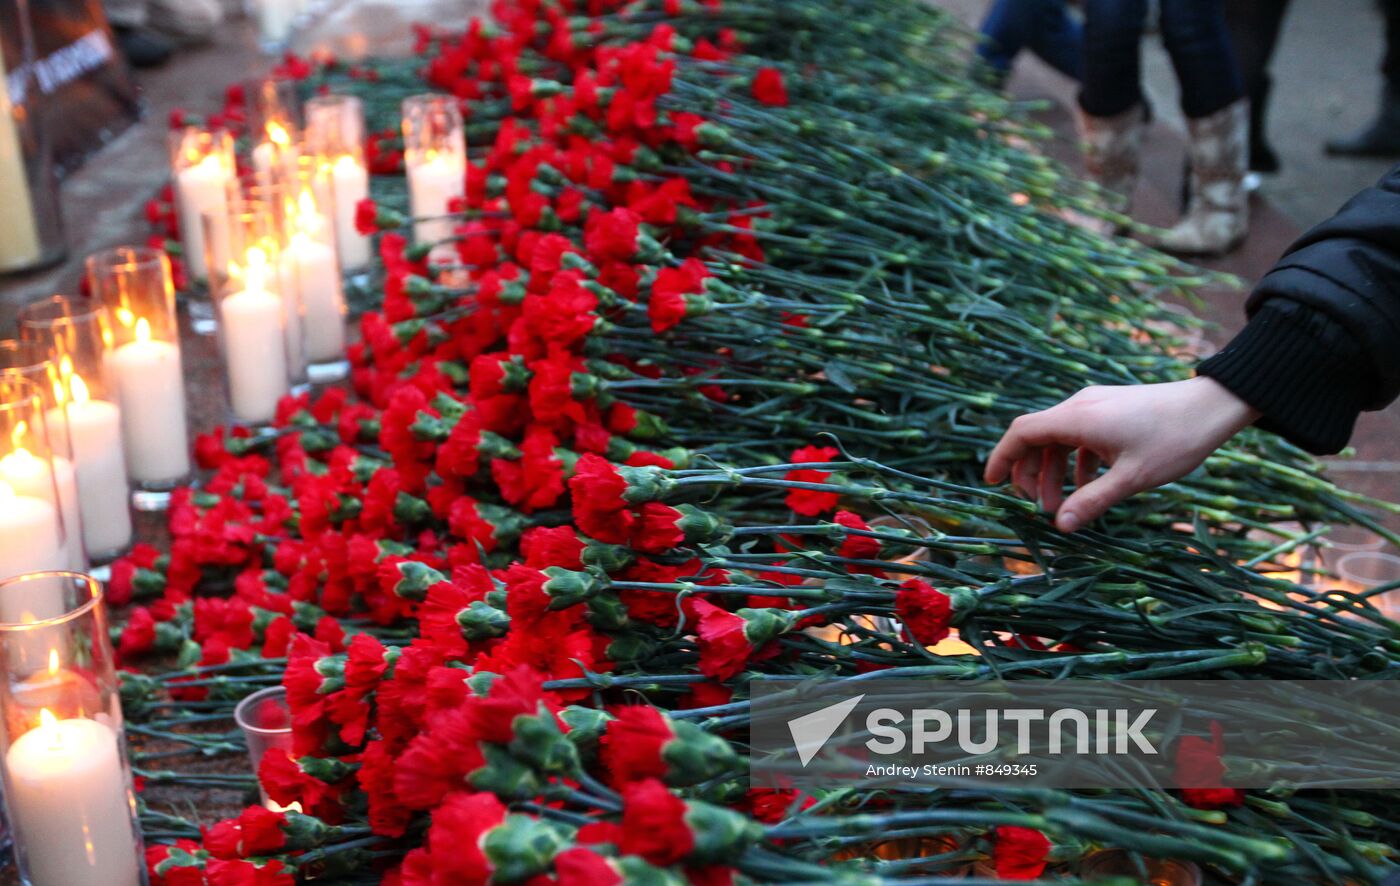 Action to commemorate Domodedovo blast victims